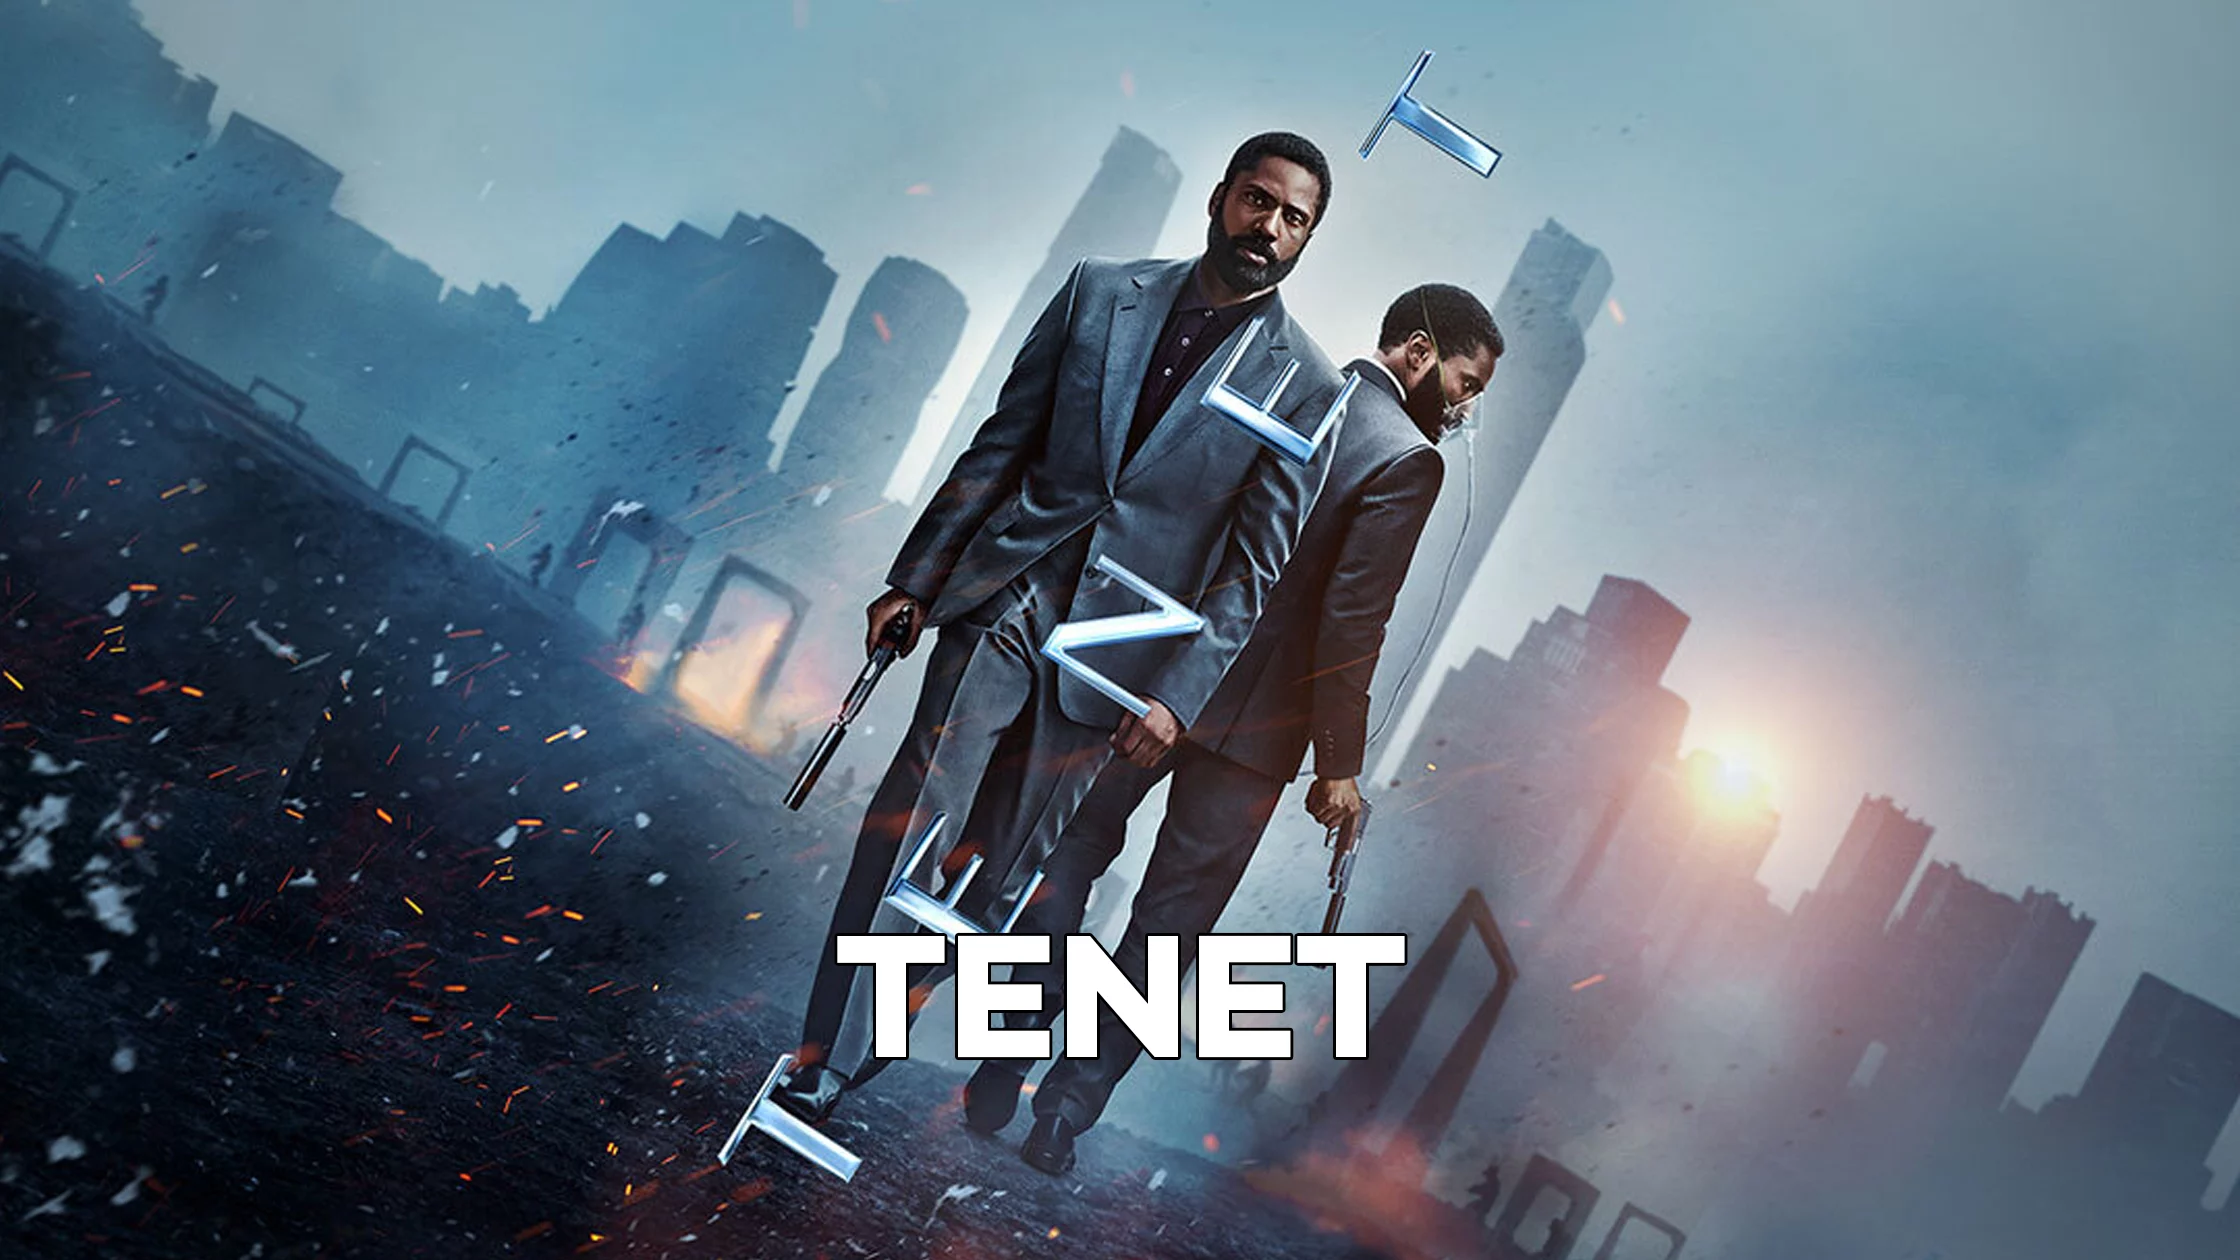 Poster of the movie Tenet. 